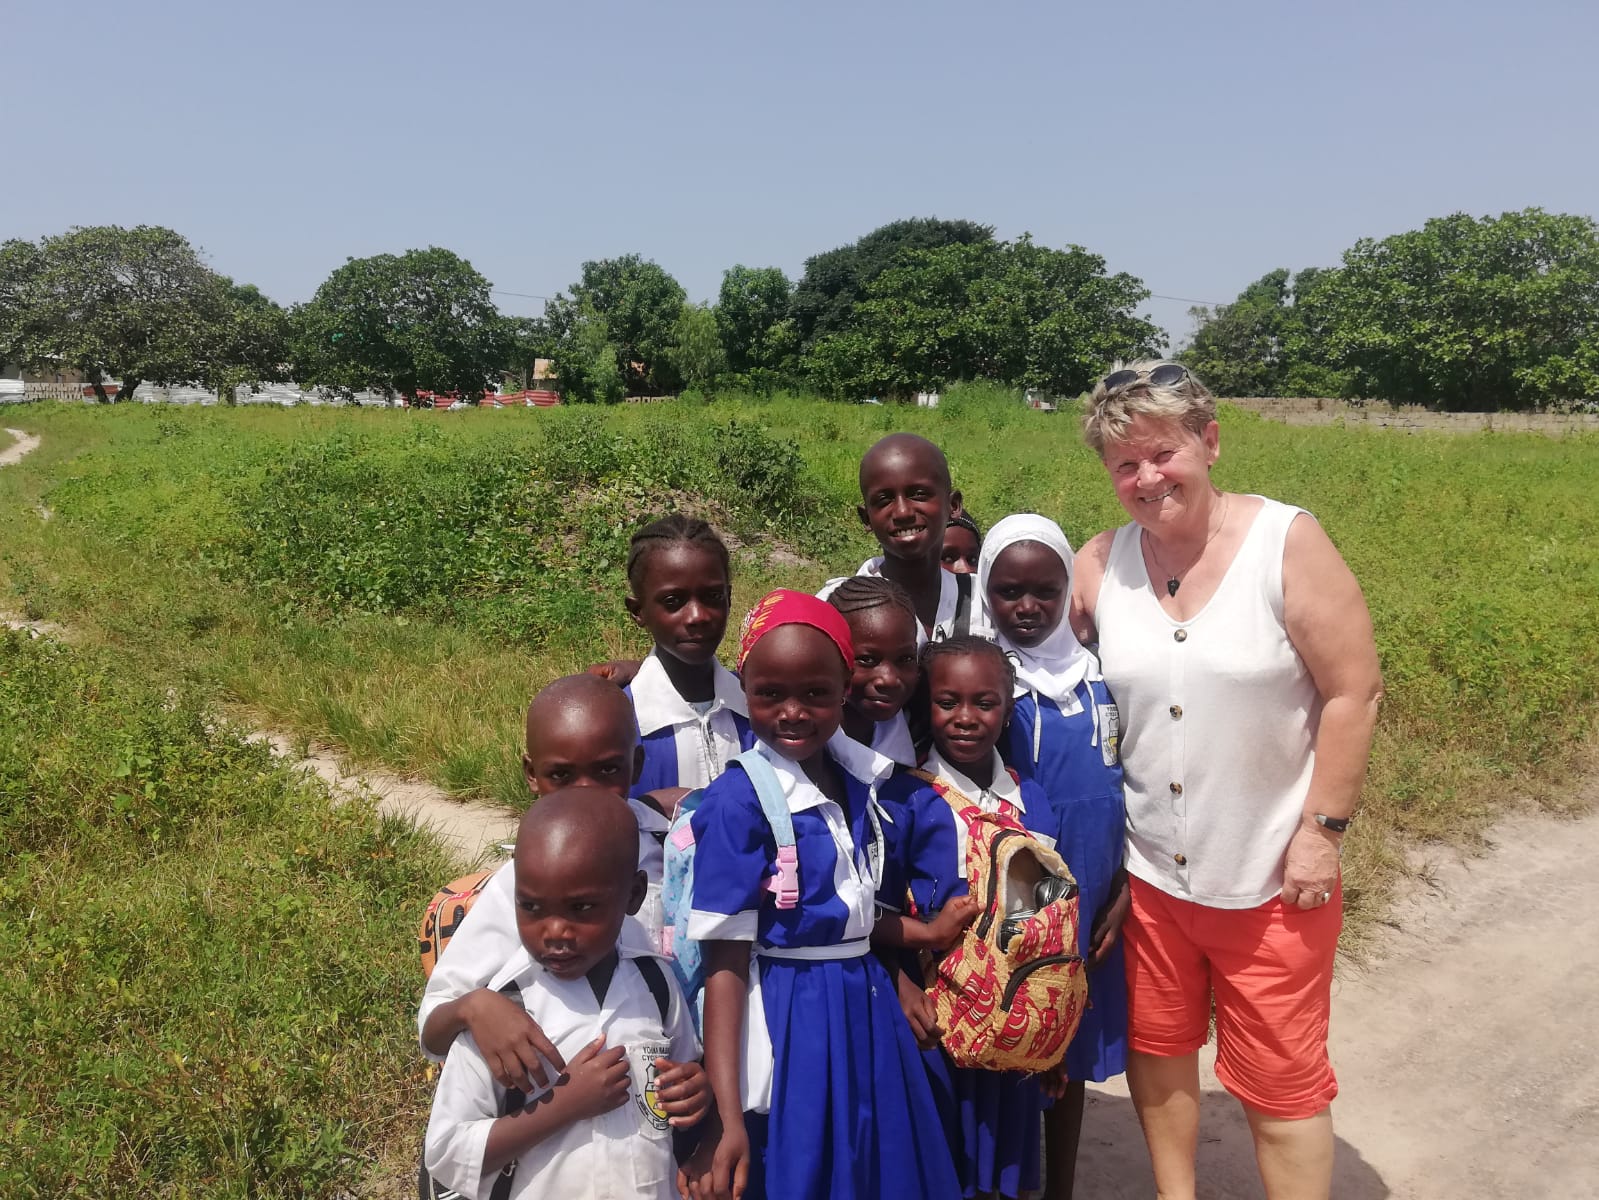 Update 21-10-19: Neues in Gambia